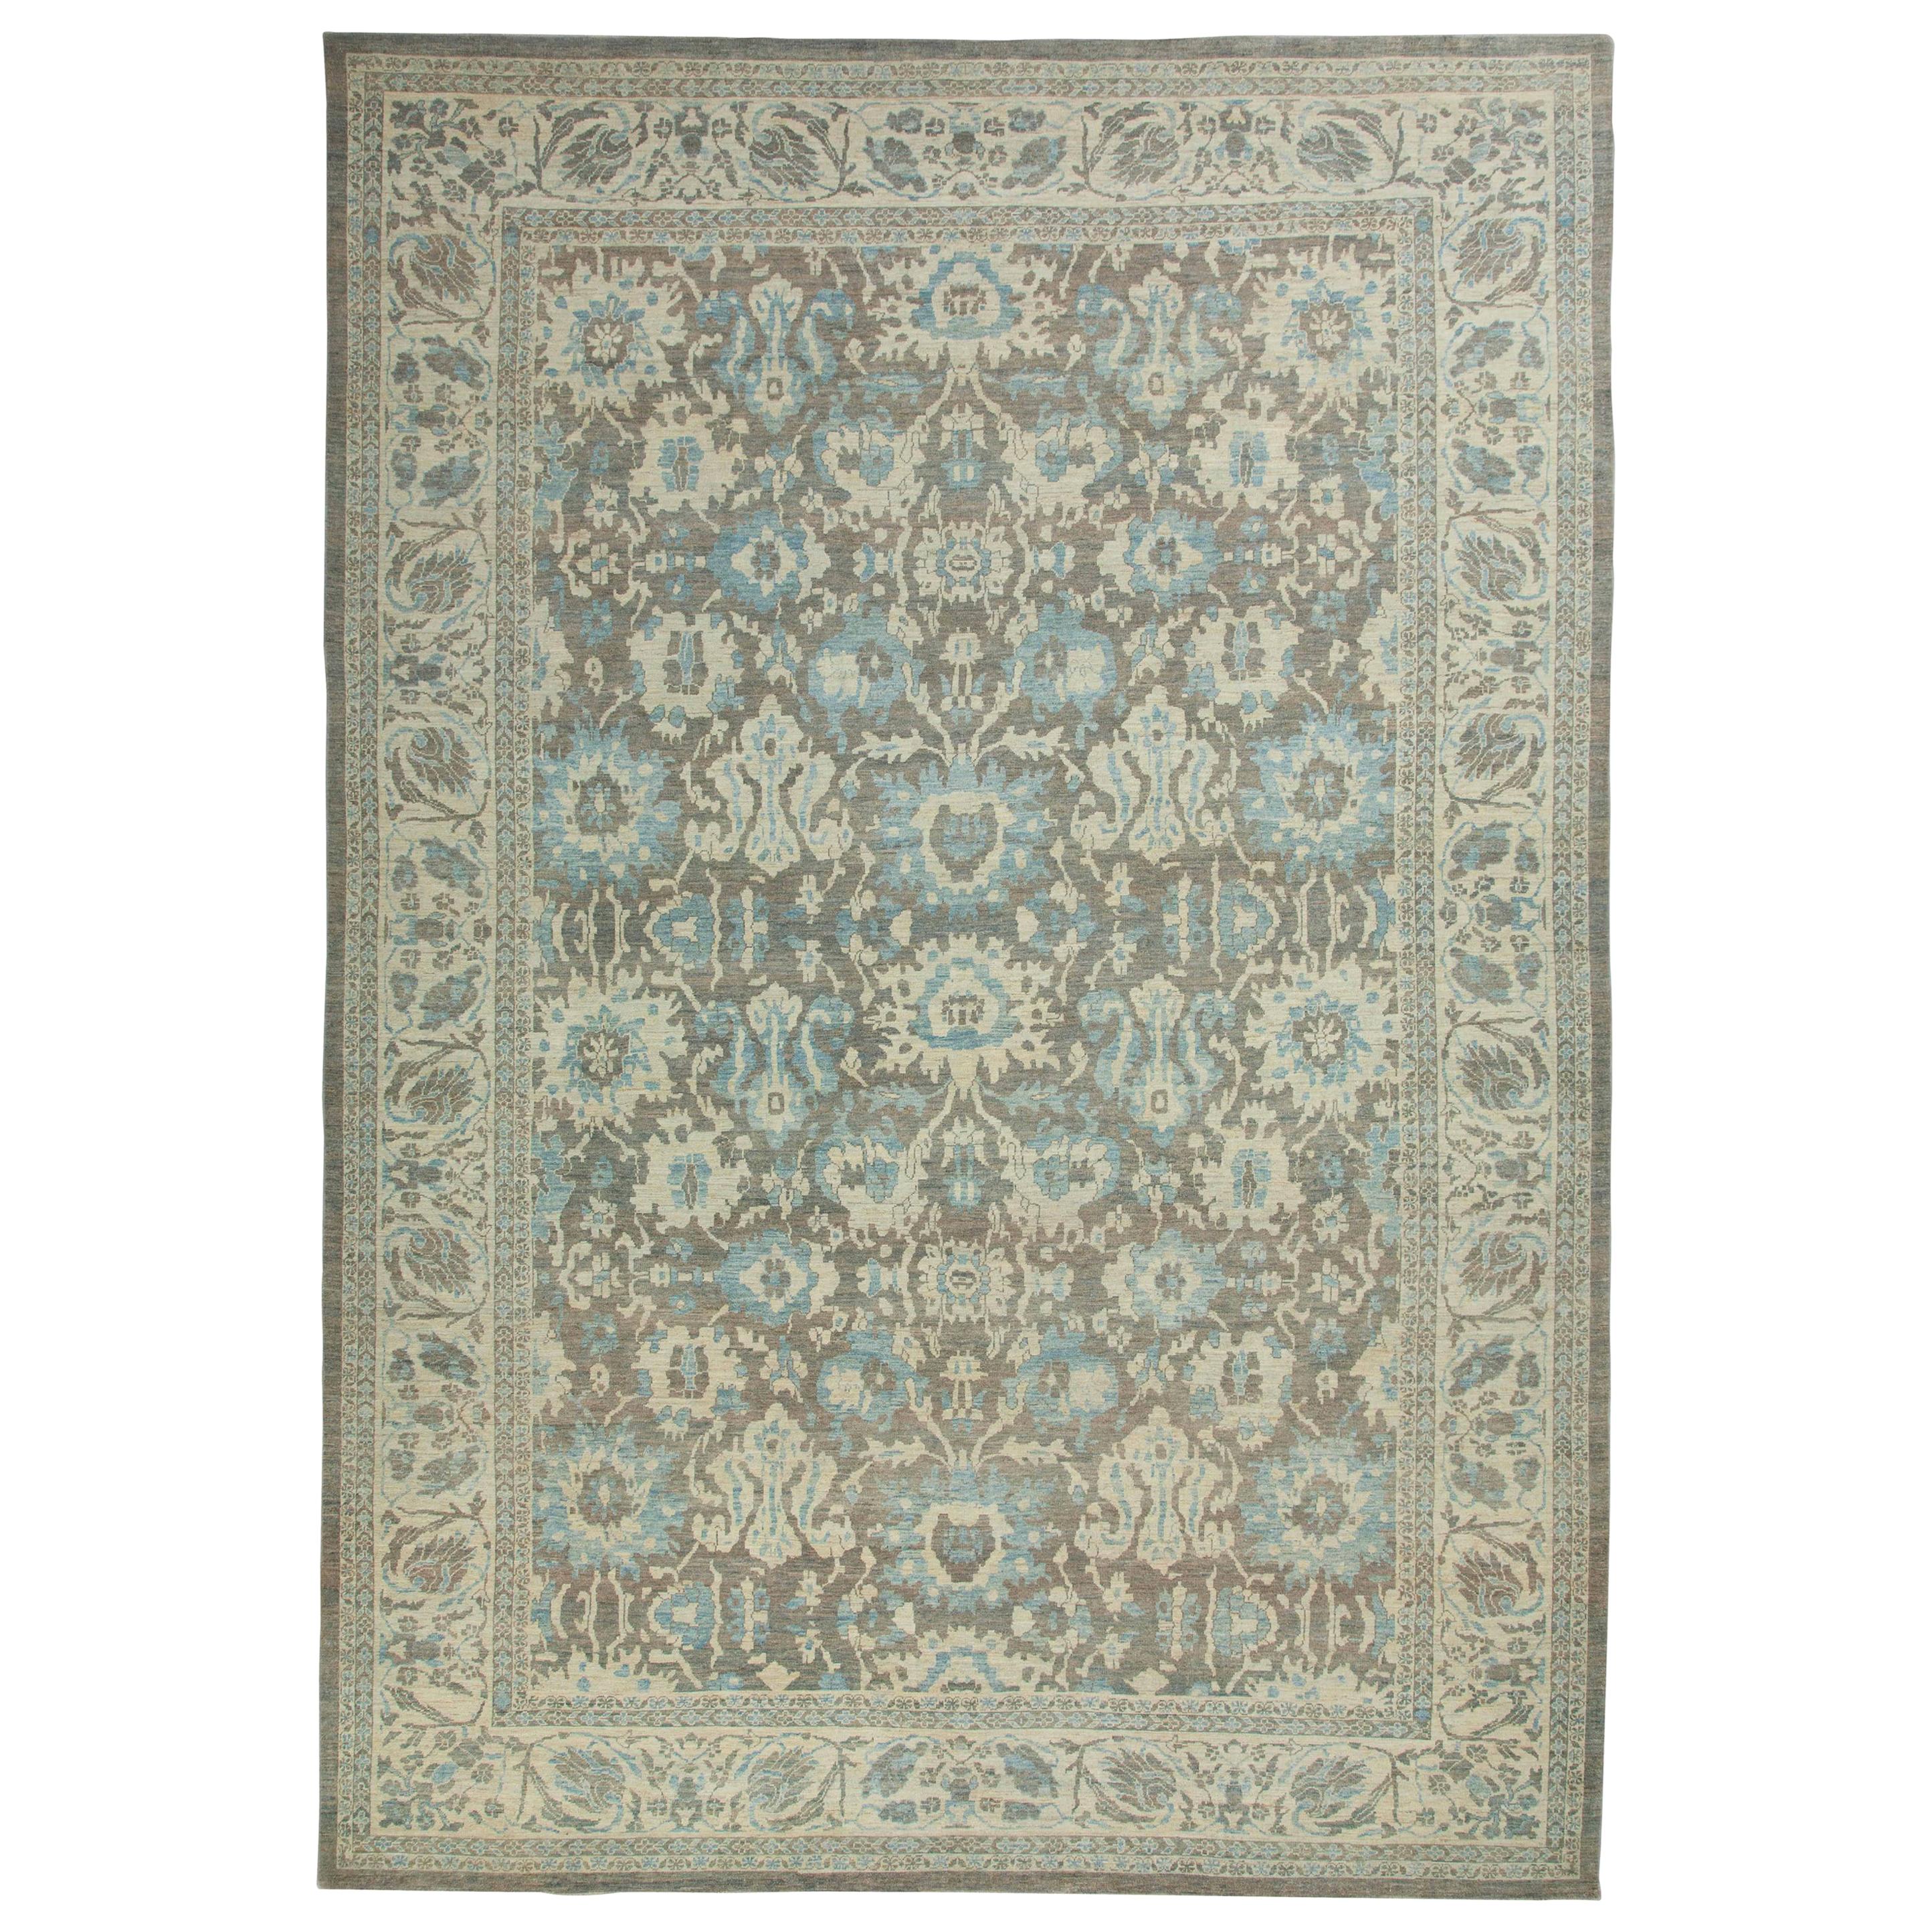 Oversized Turkish Style Sultanabad Rug with Blue and Ivory Floral Details